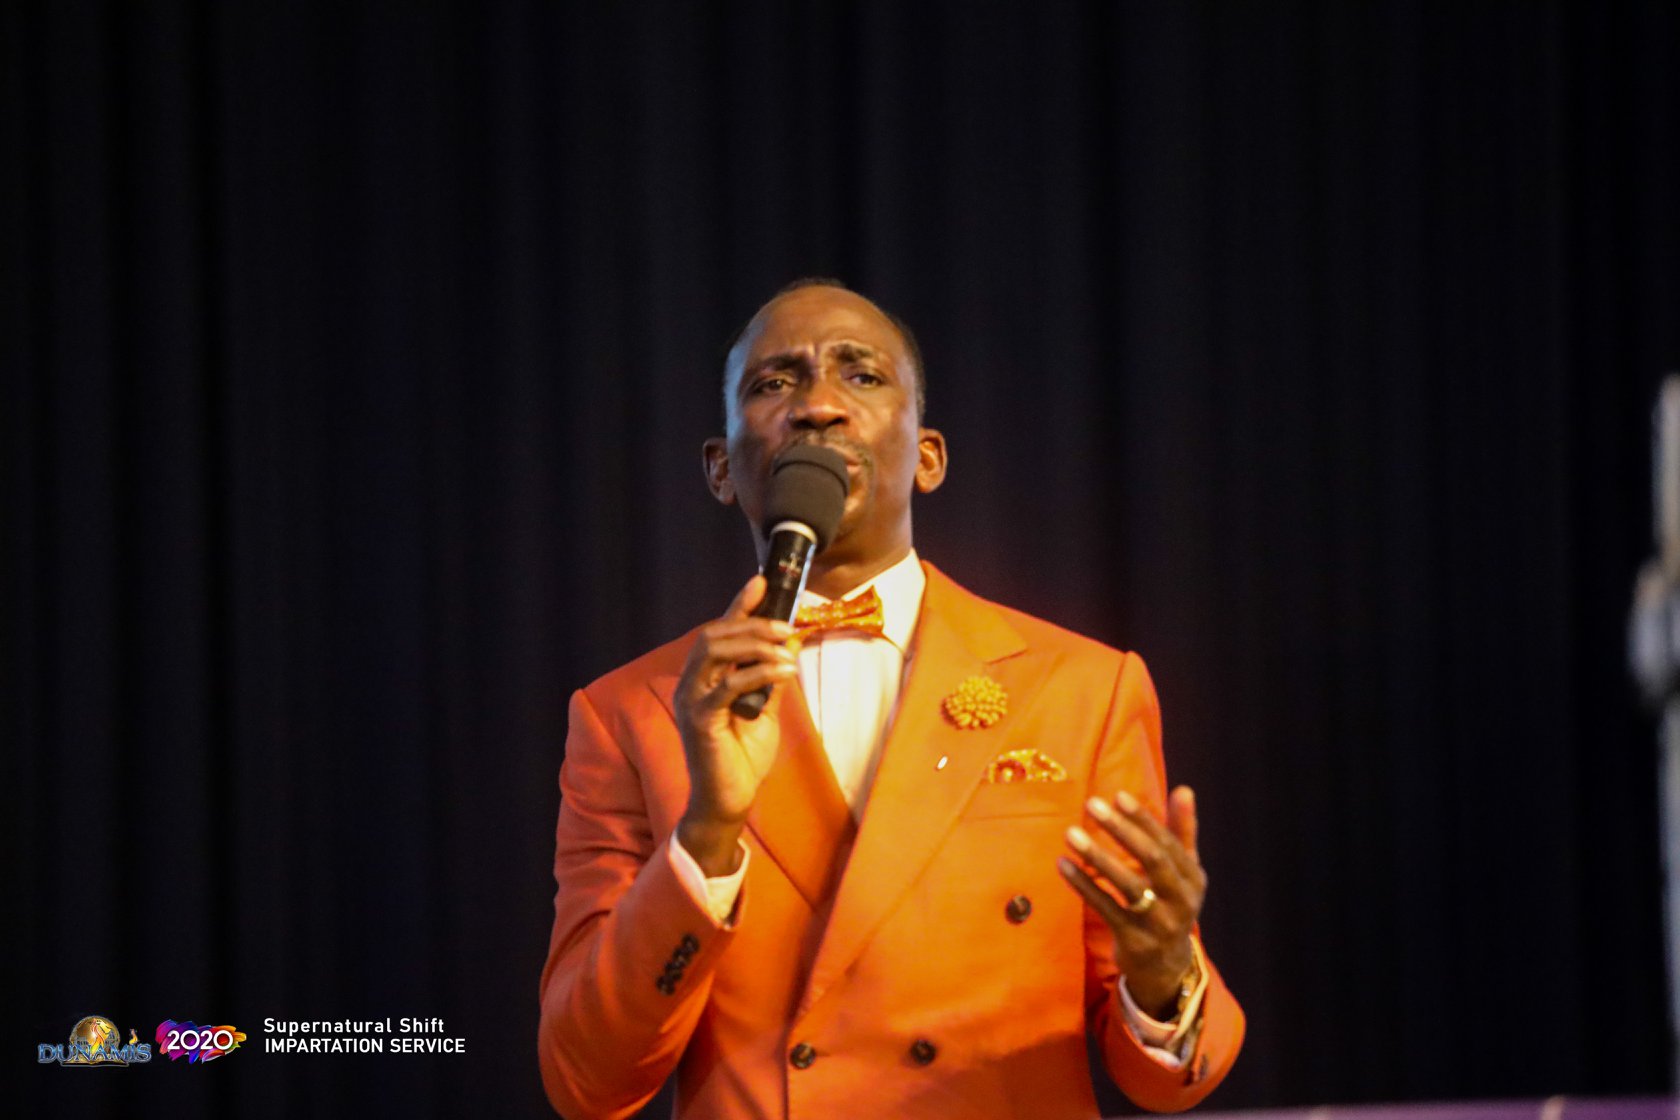 July 21st 2020 Healing And Prophetic Declaration by Dr Paul Enenche & Becky Enenche